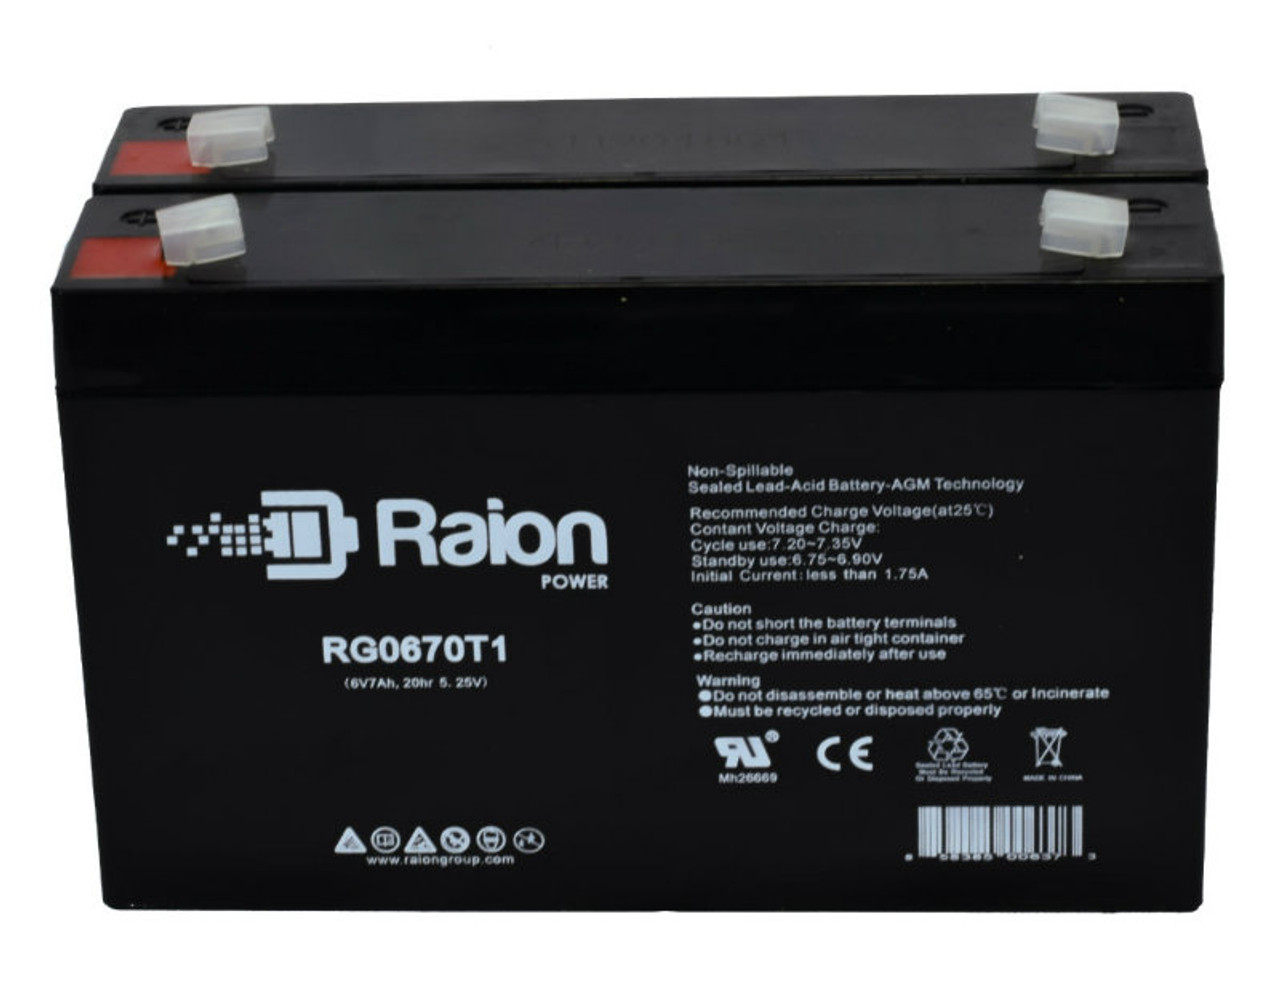 Raion Power RG0670T1 6V 7Ah Replacement Emergency Light Battery for IBT BT7.5-6 - 2 Pack